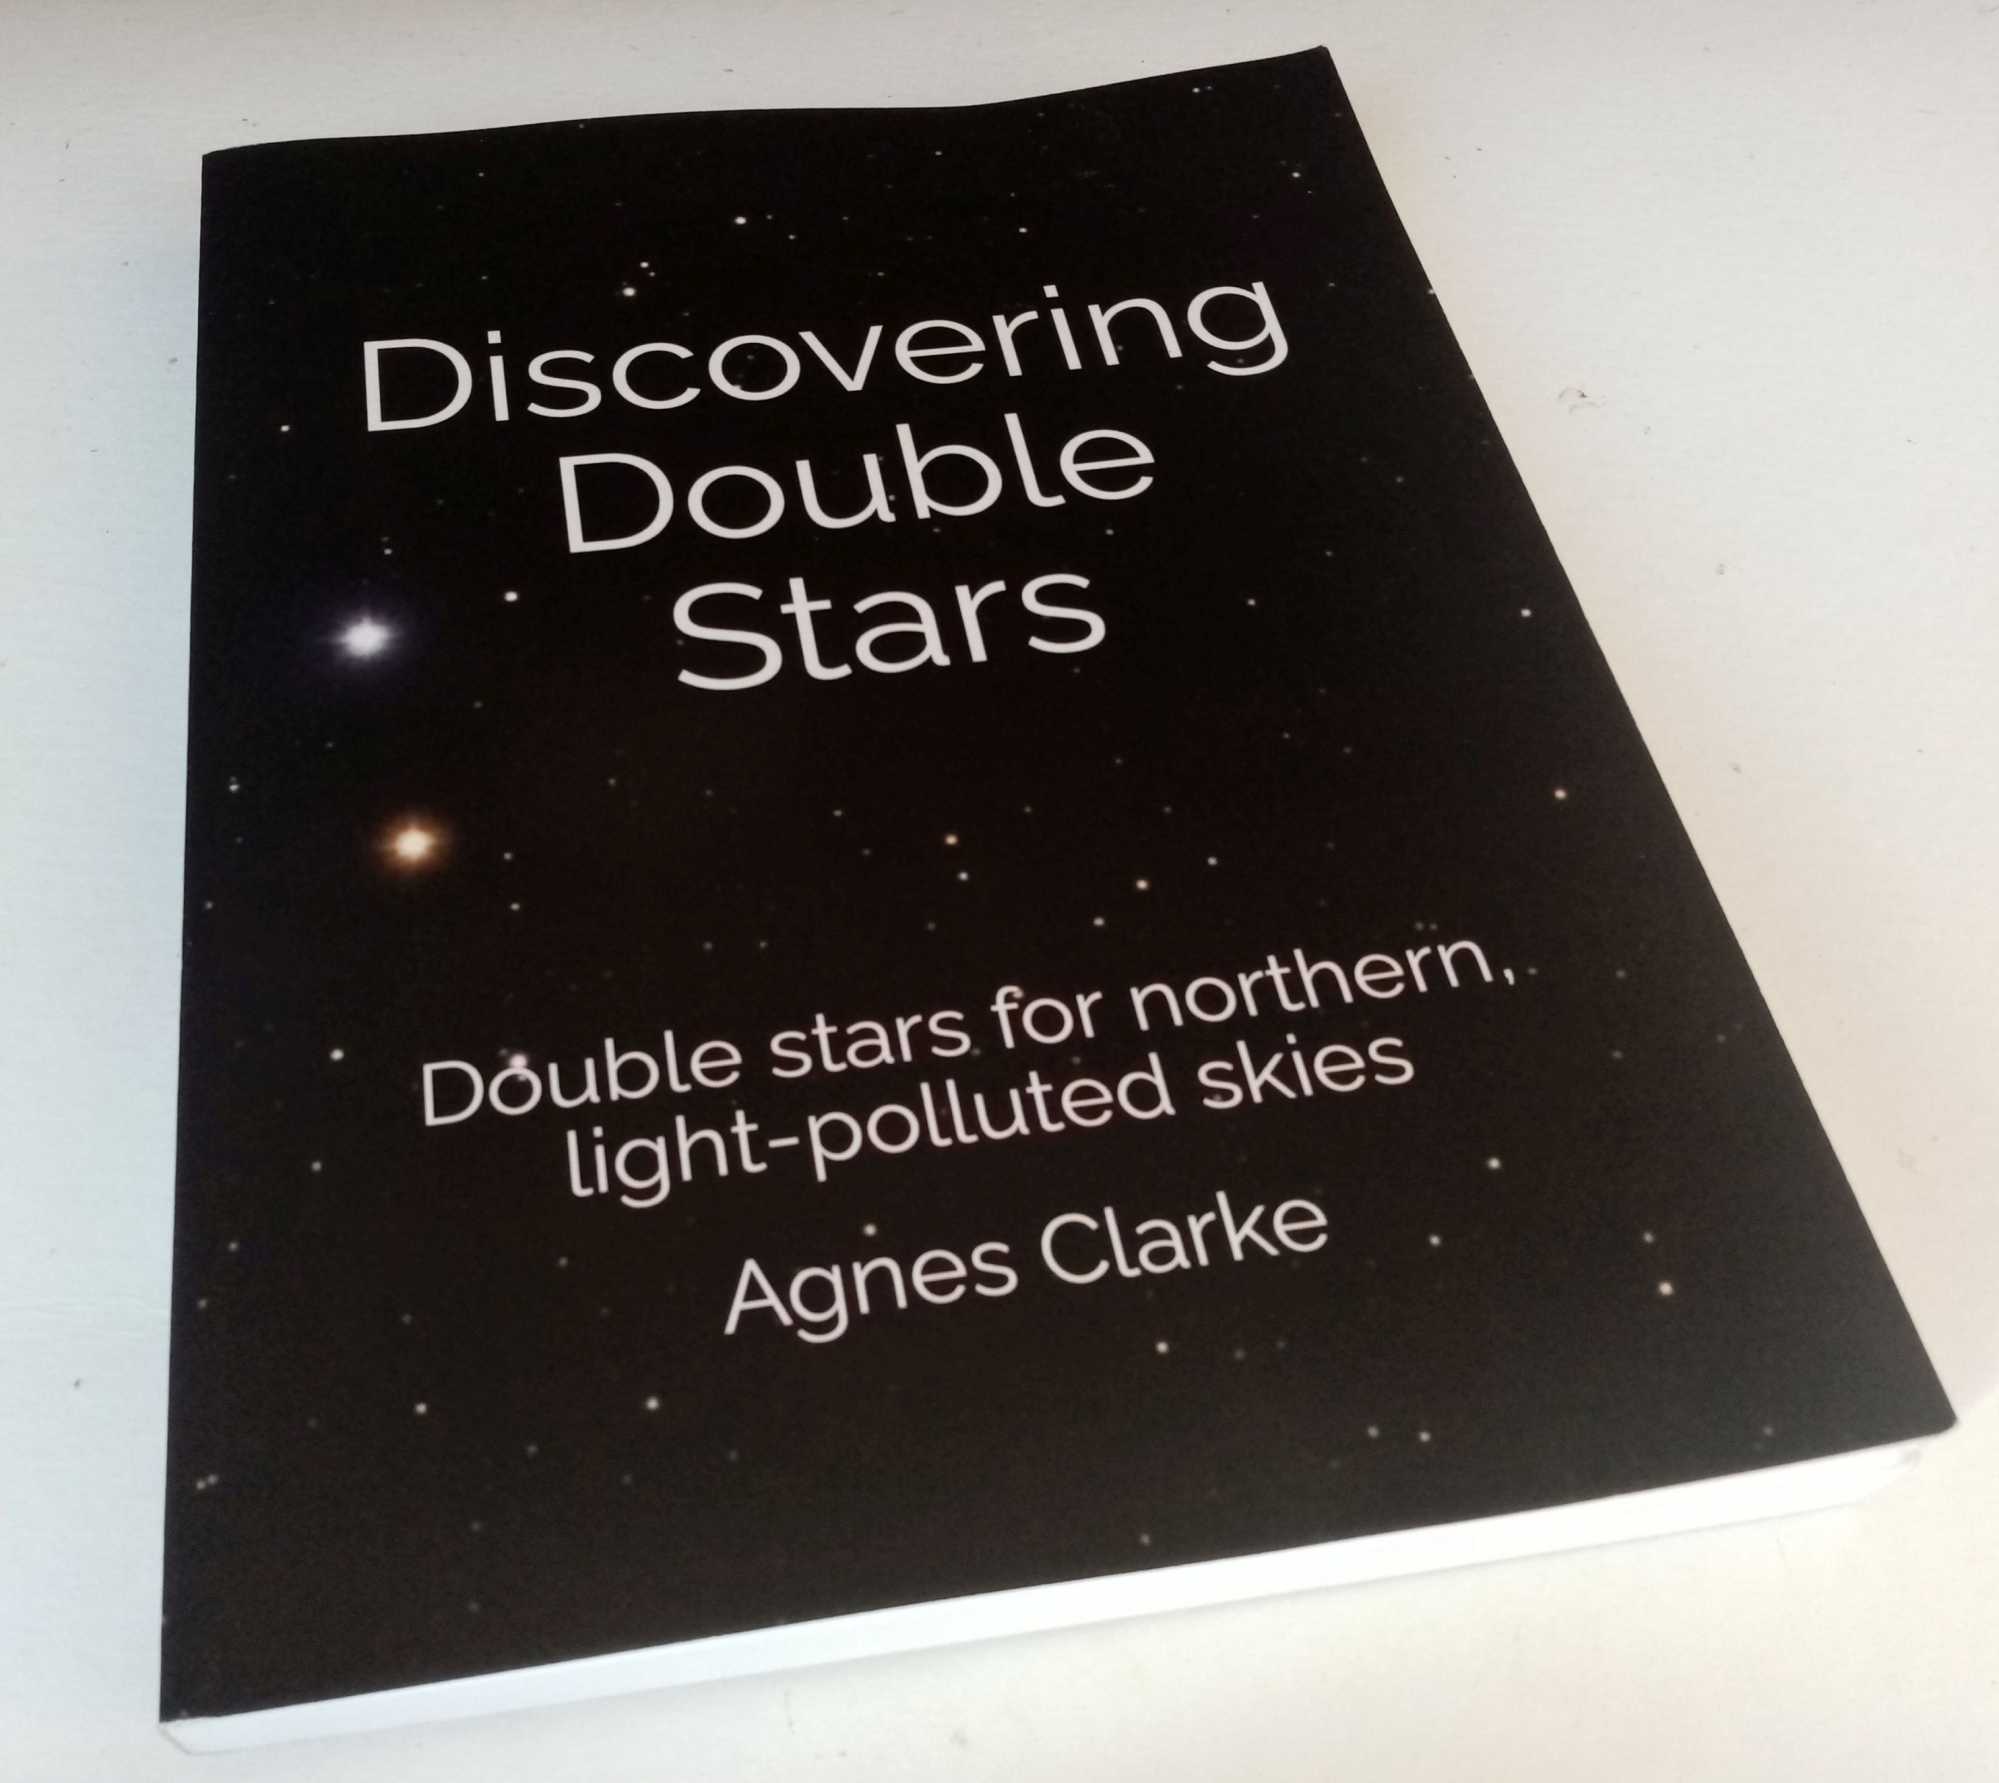 Agnes Clarke - Discovering Double Stars: Double stars for northern, light-polluted skies